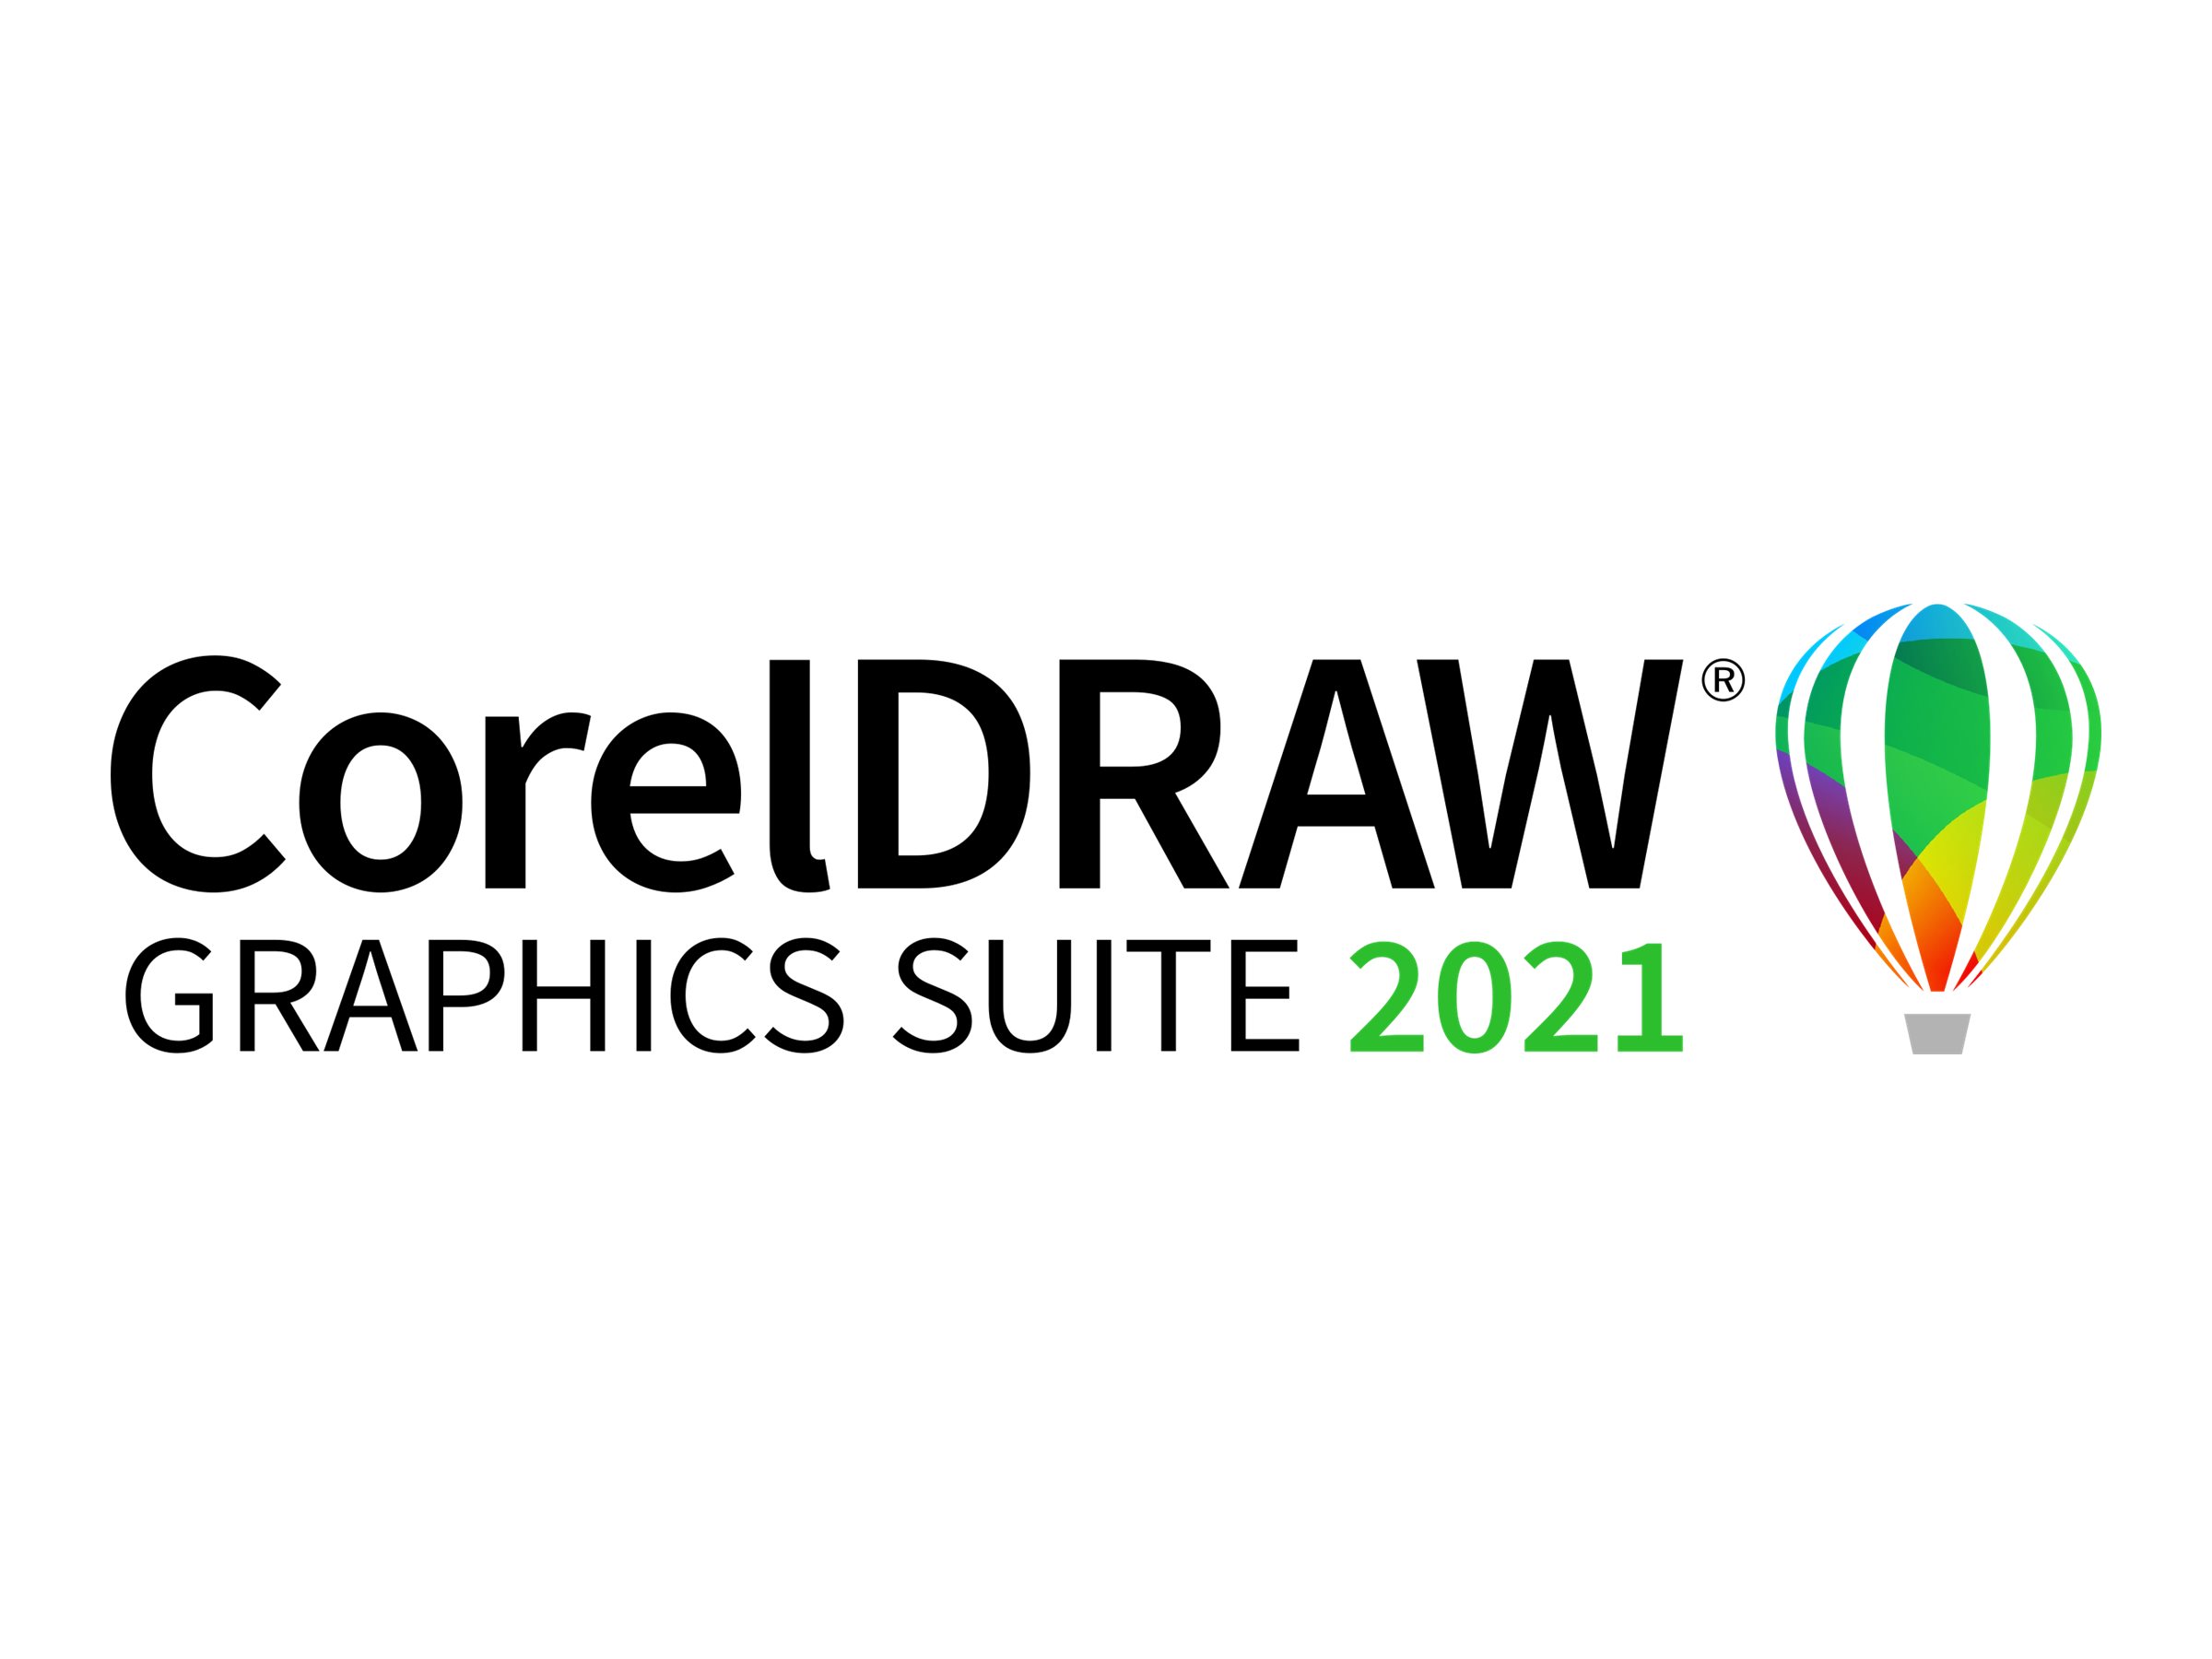 Corel Draw Graphics Suite 2021 Software User Guide